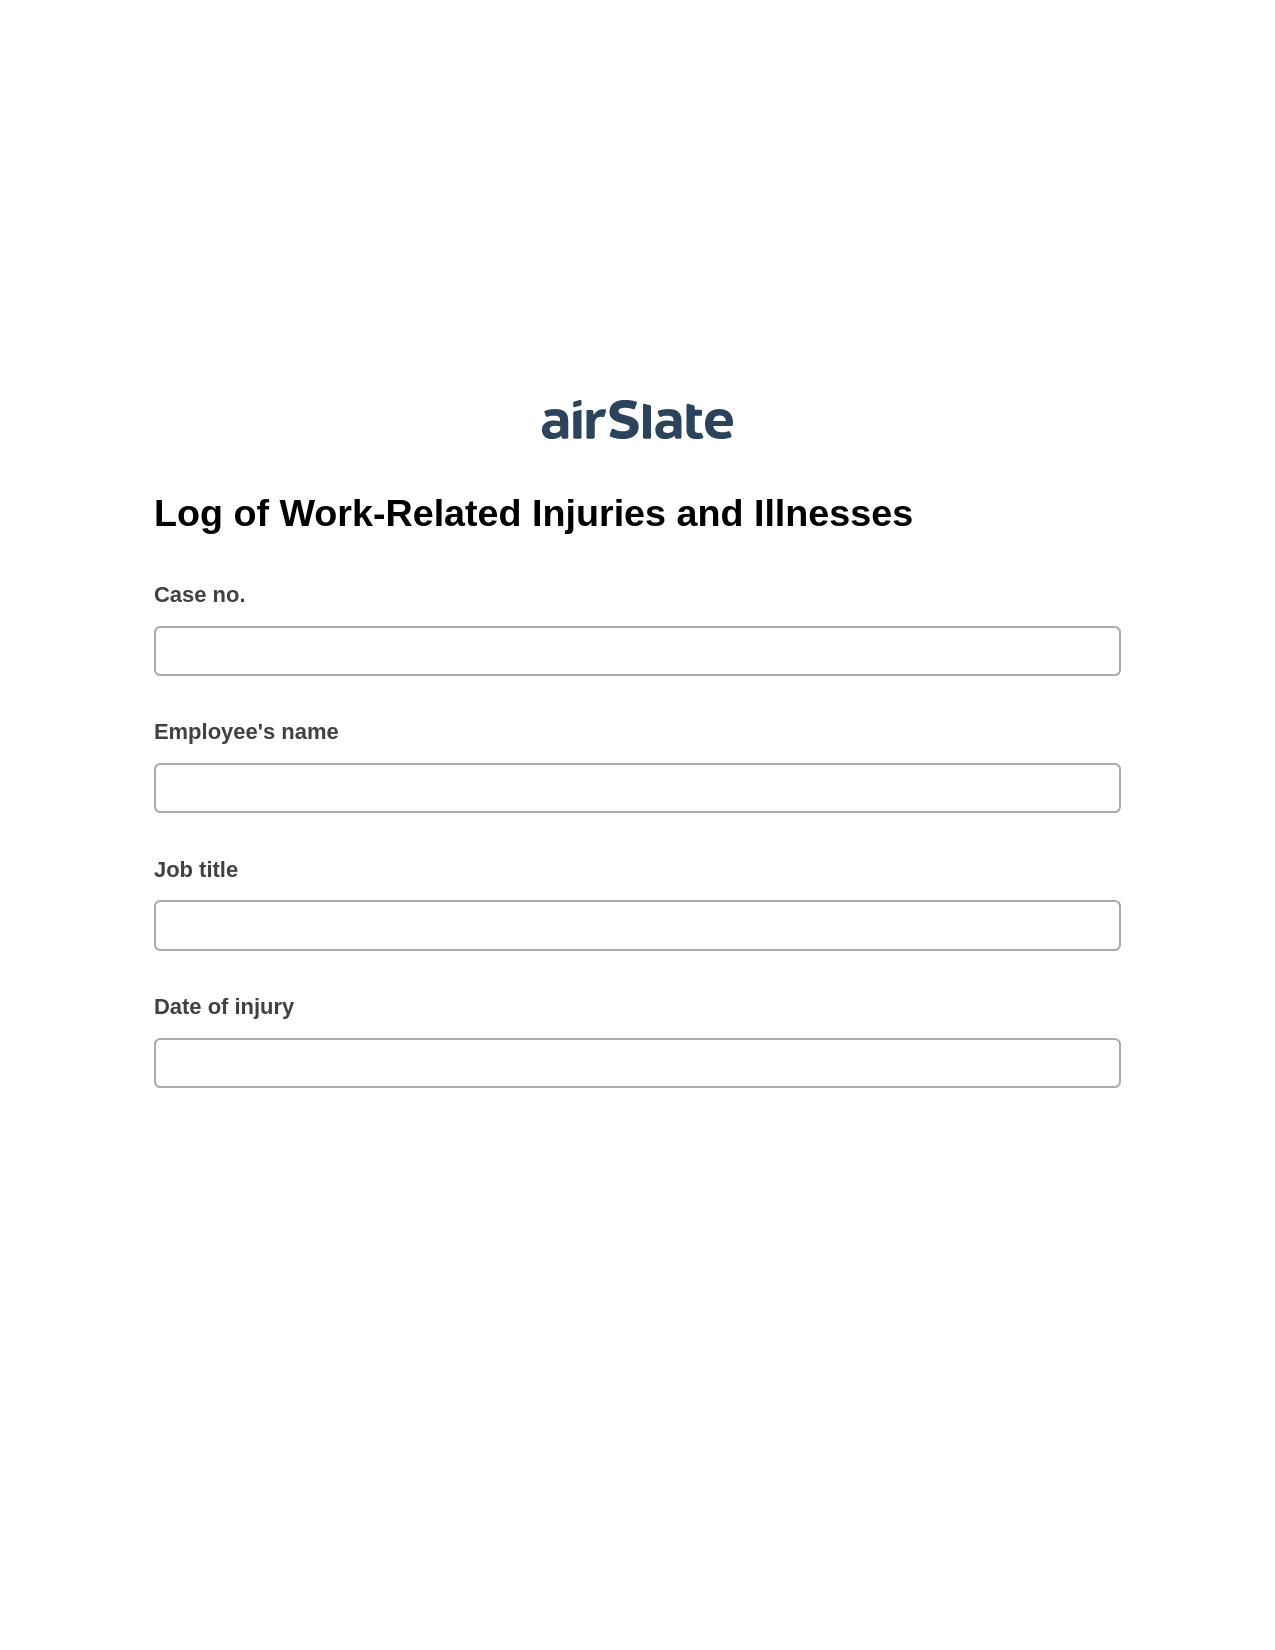 Log of Work-Related Injuries and Illnesses Pre-fill from Excel Spreadsheet Dropdown Options Bot, Invoke Salesforce Process Bot, Export to Salesforce Bot